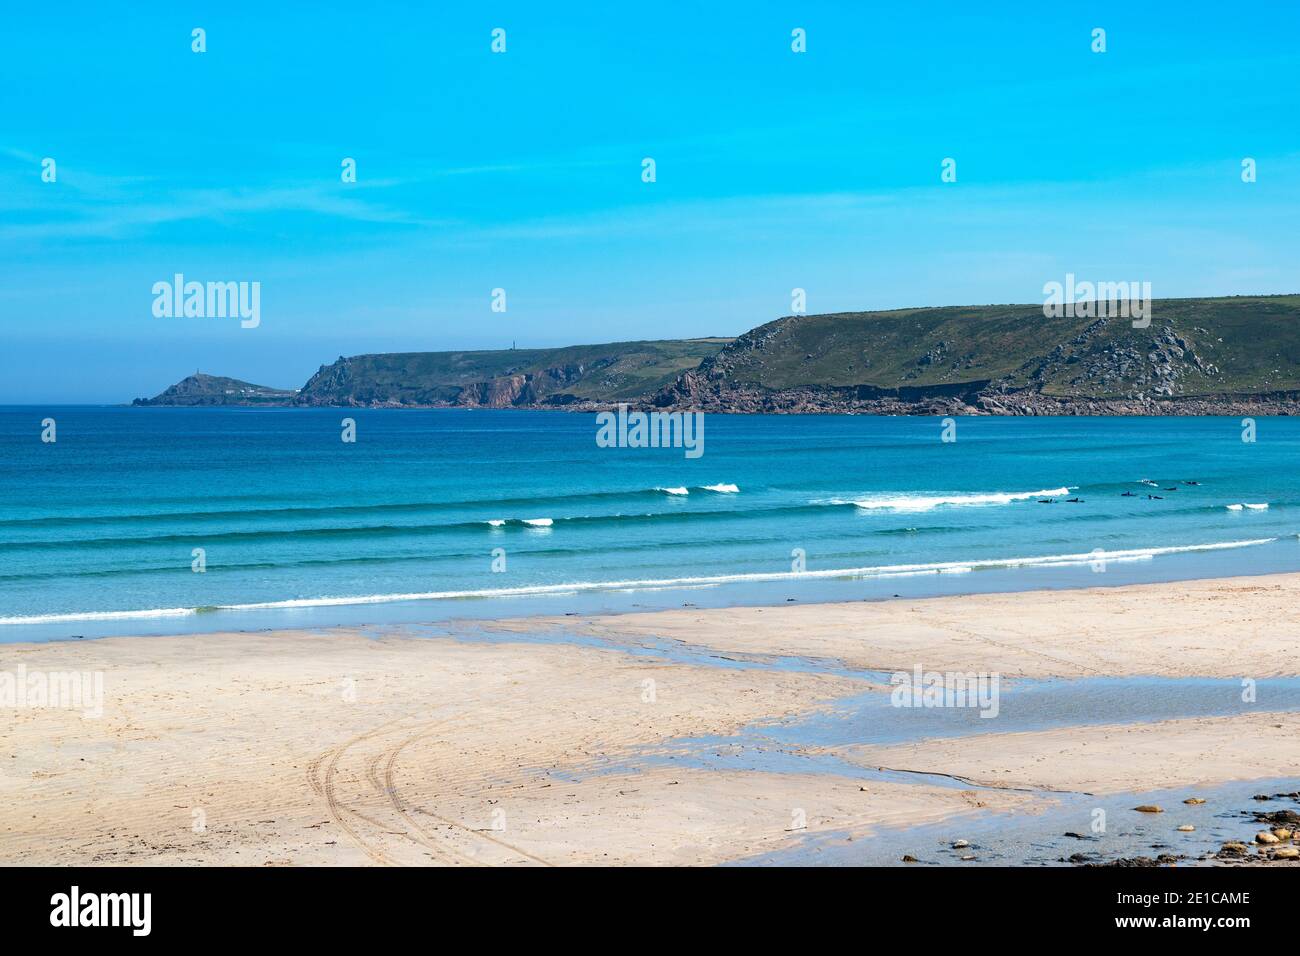 Whitesand bay at sennen cove near lands end in cornwall england Stock Photo